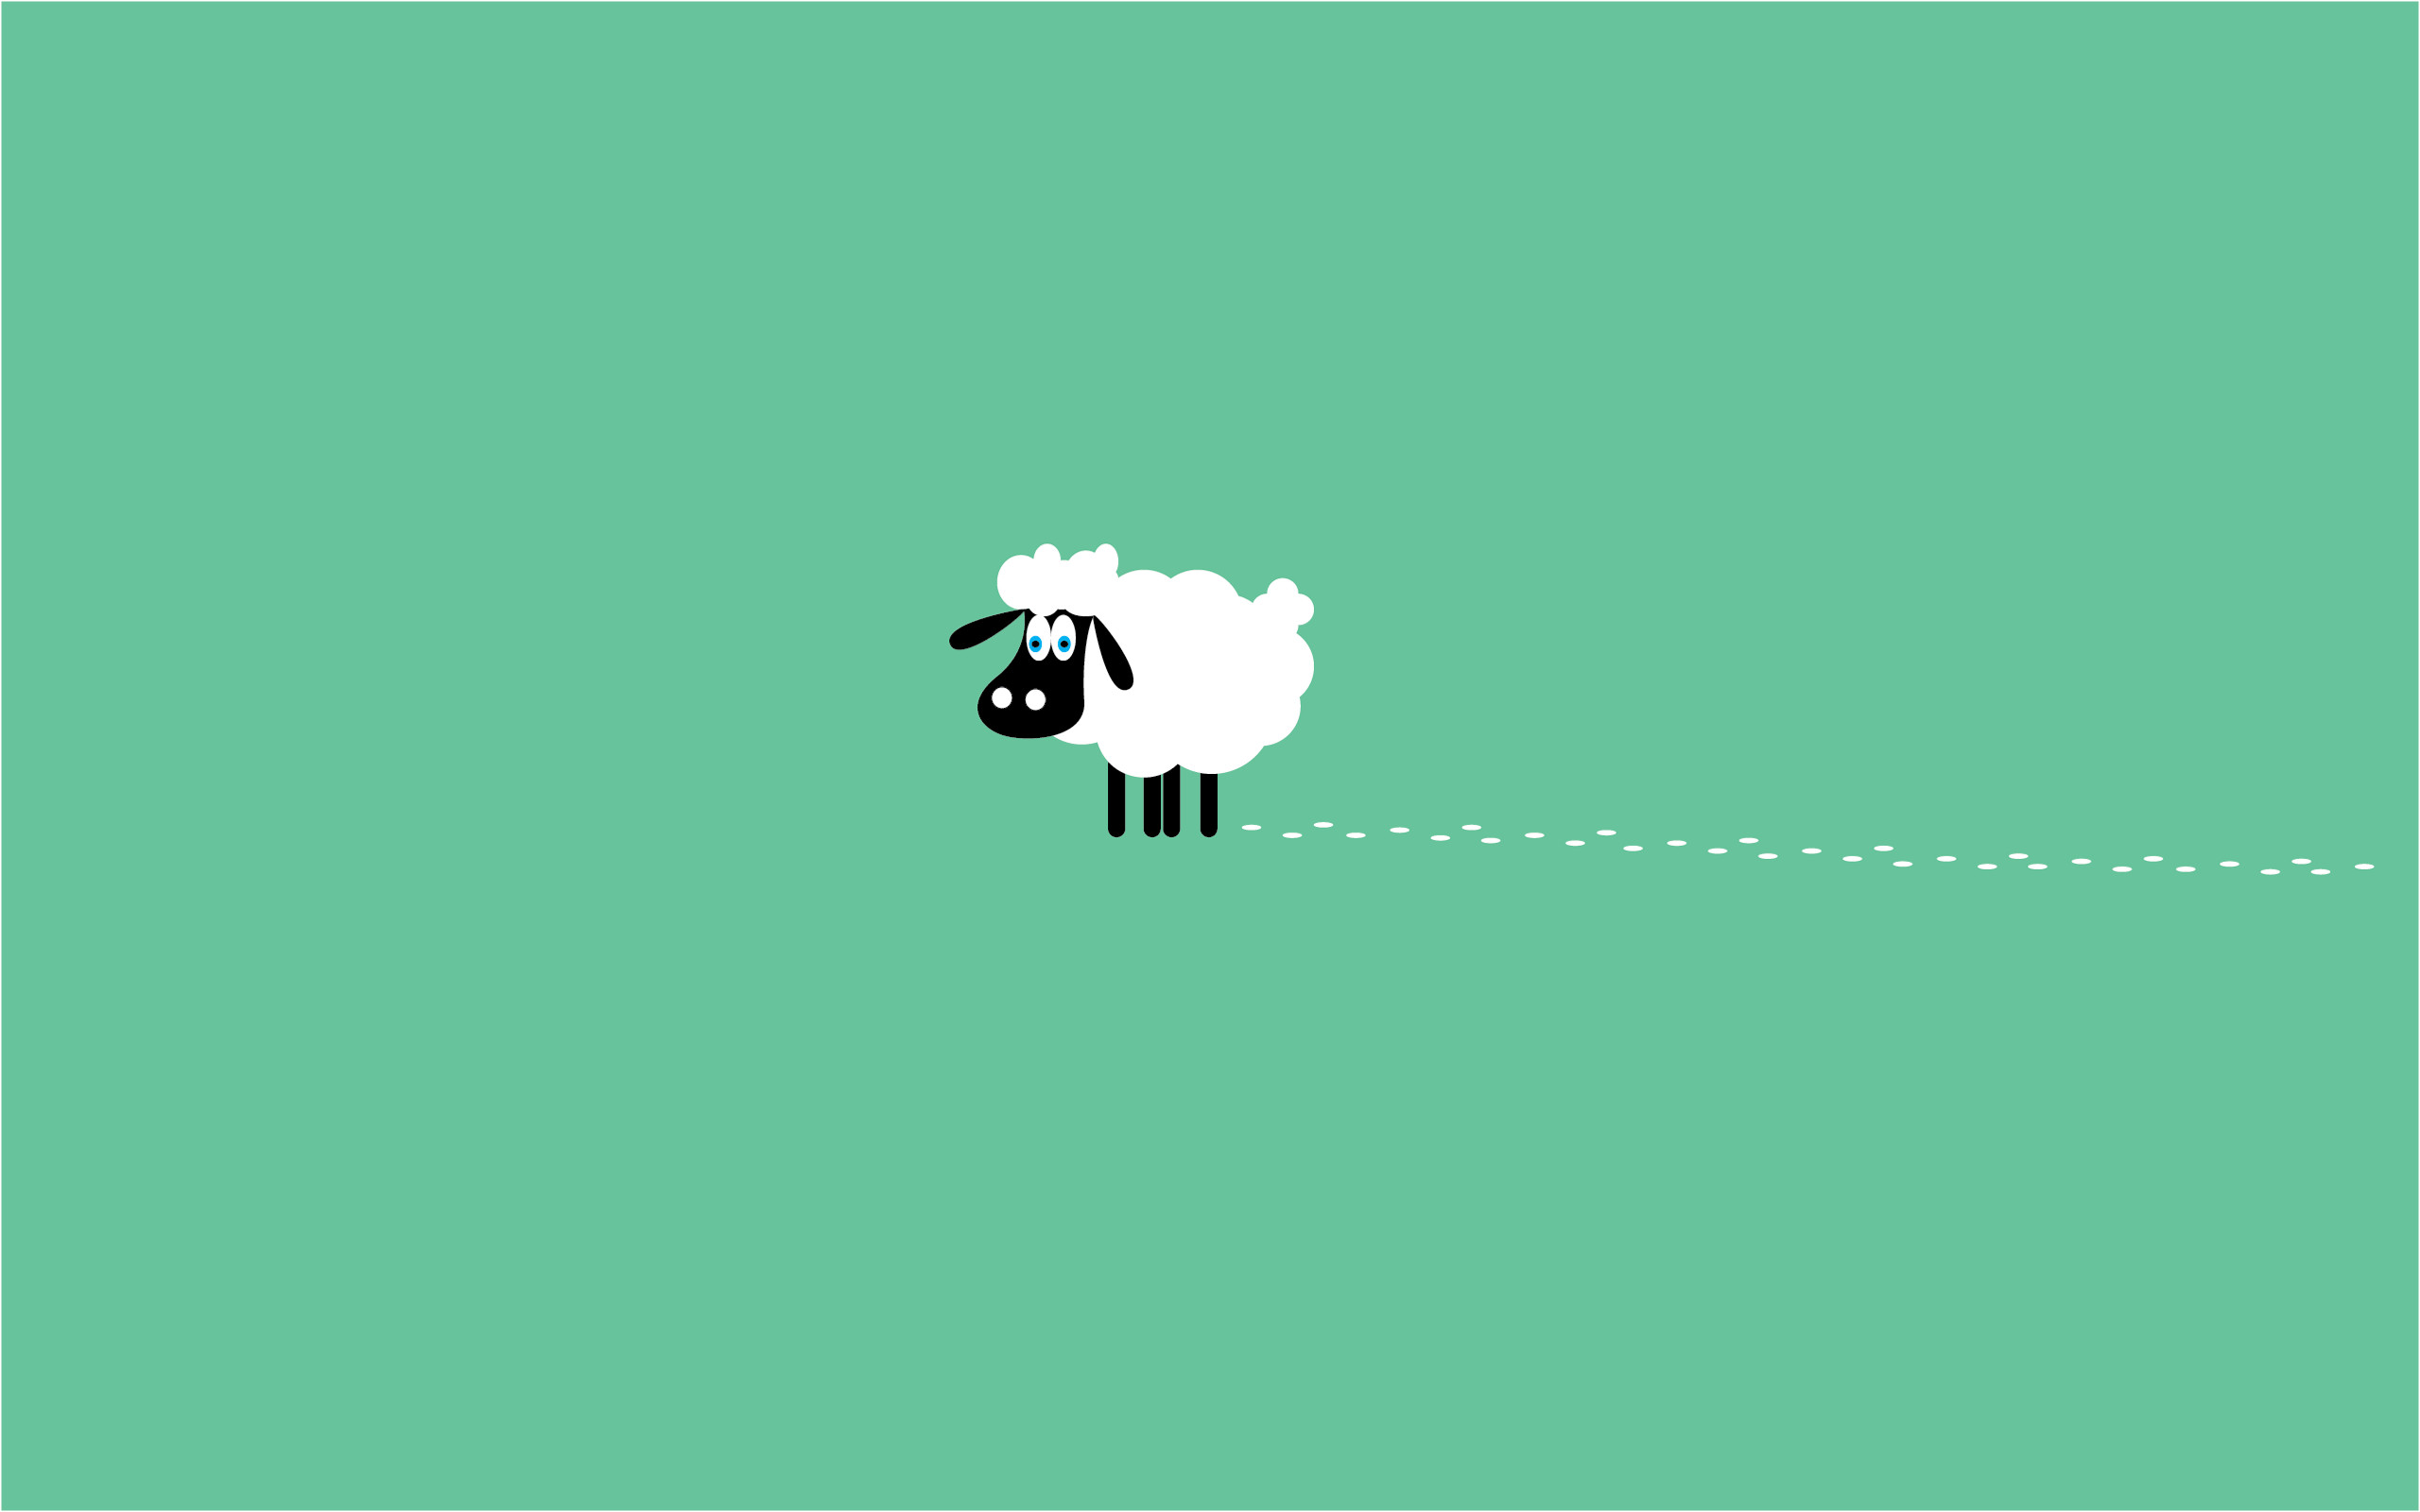 2560x1600 Sheep images Sheep HD wallpaper and background photos